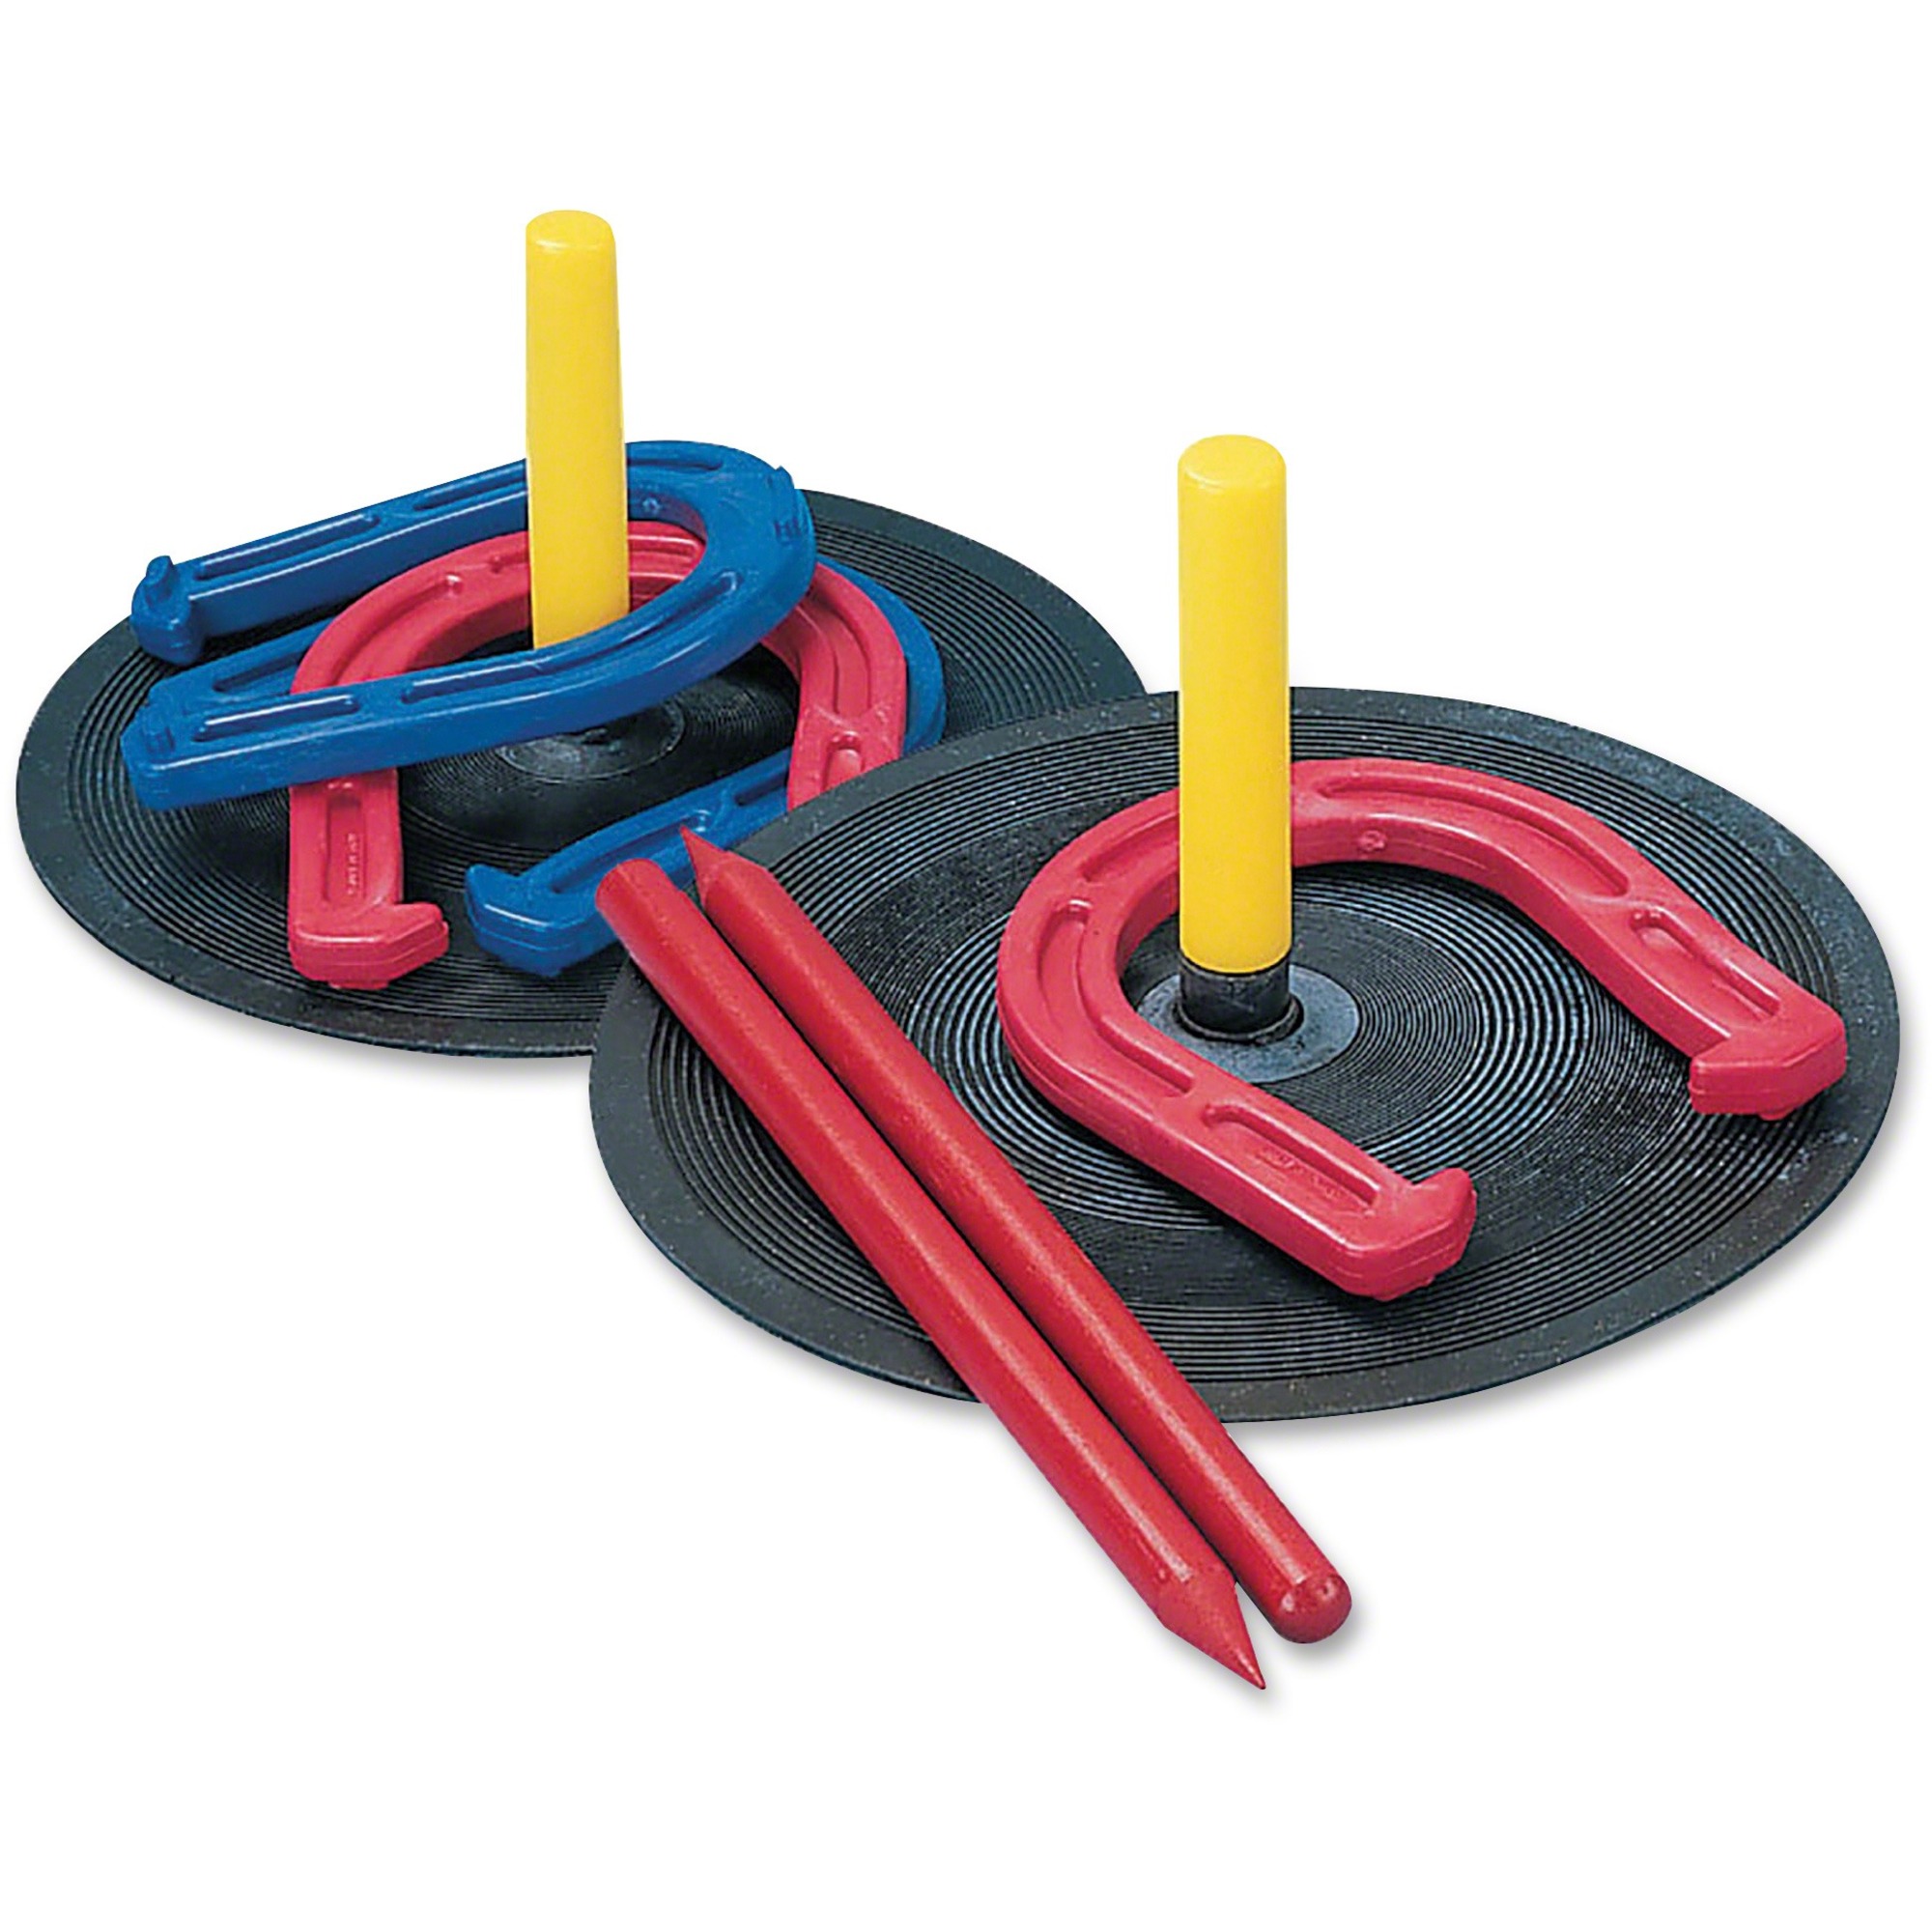  Win SPORTS Rubber Horseshoes Game Set For Outdoor